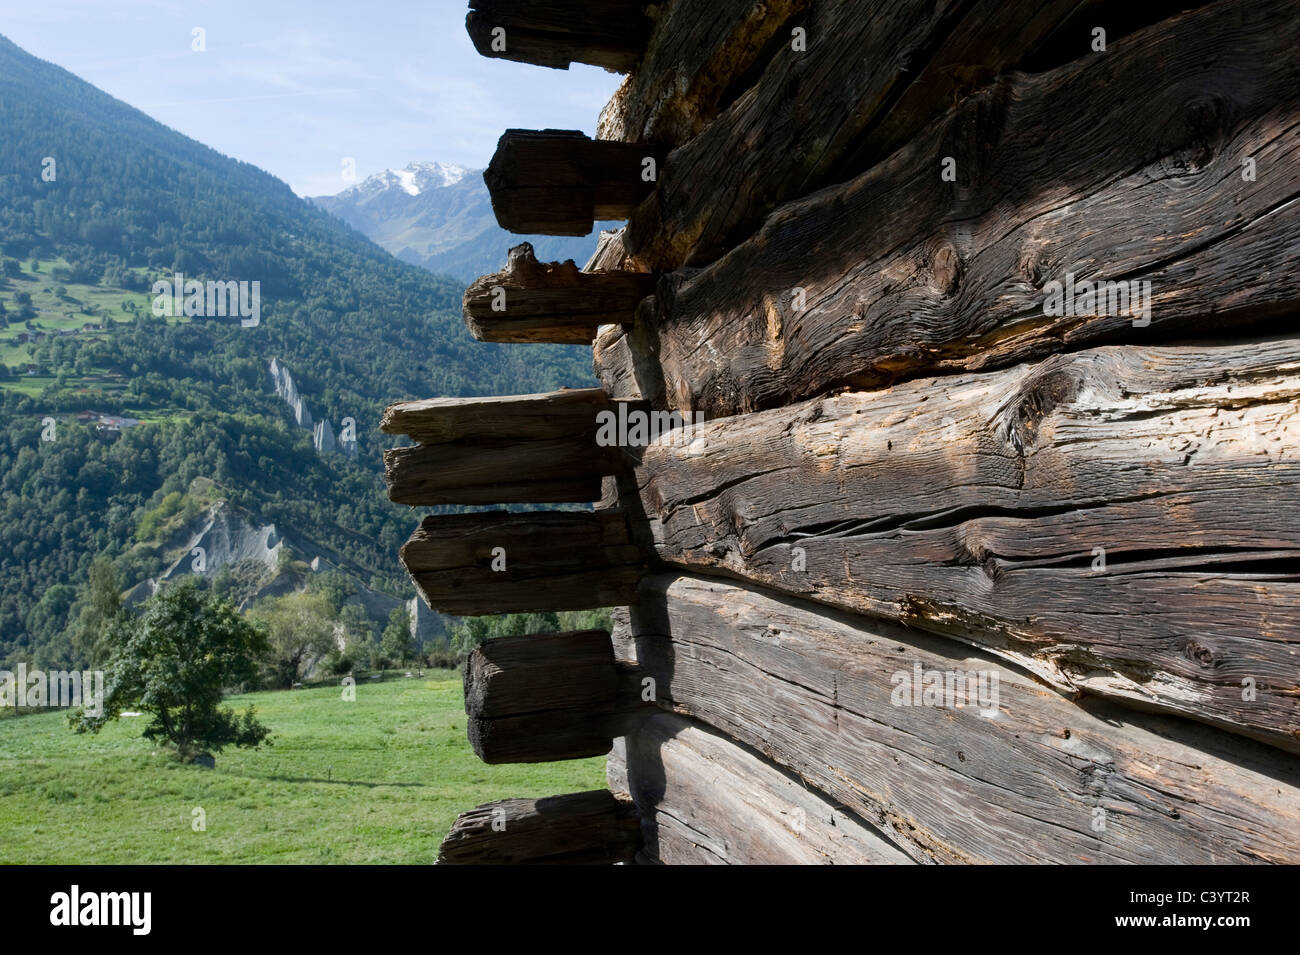 Ossona Switzerland High Resolution Stock Photography and Images - Alamy